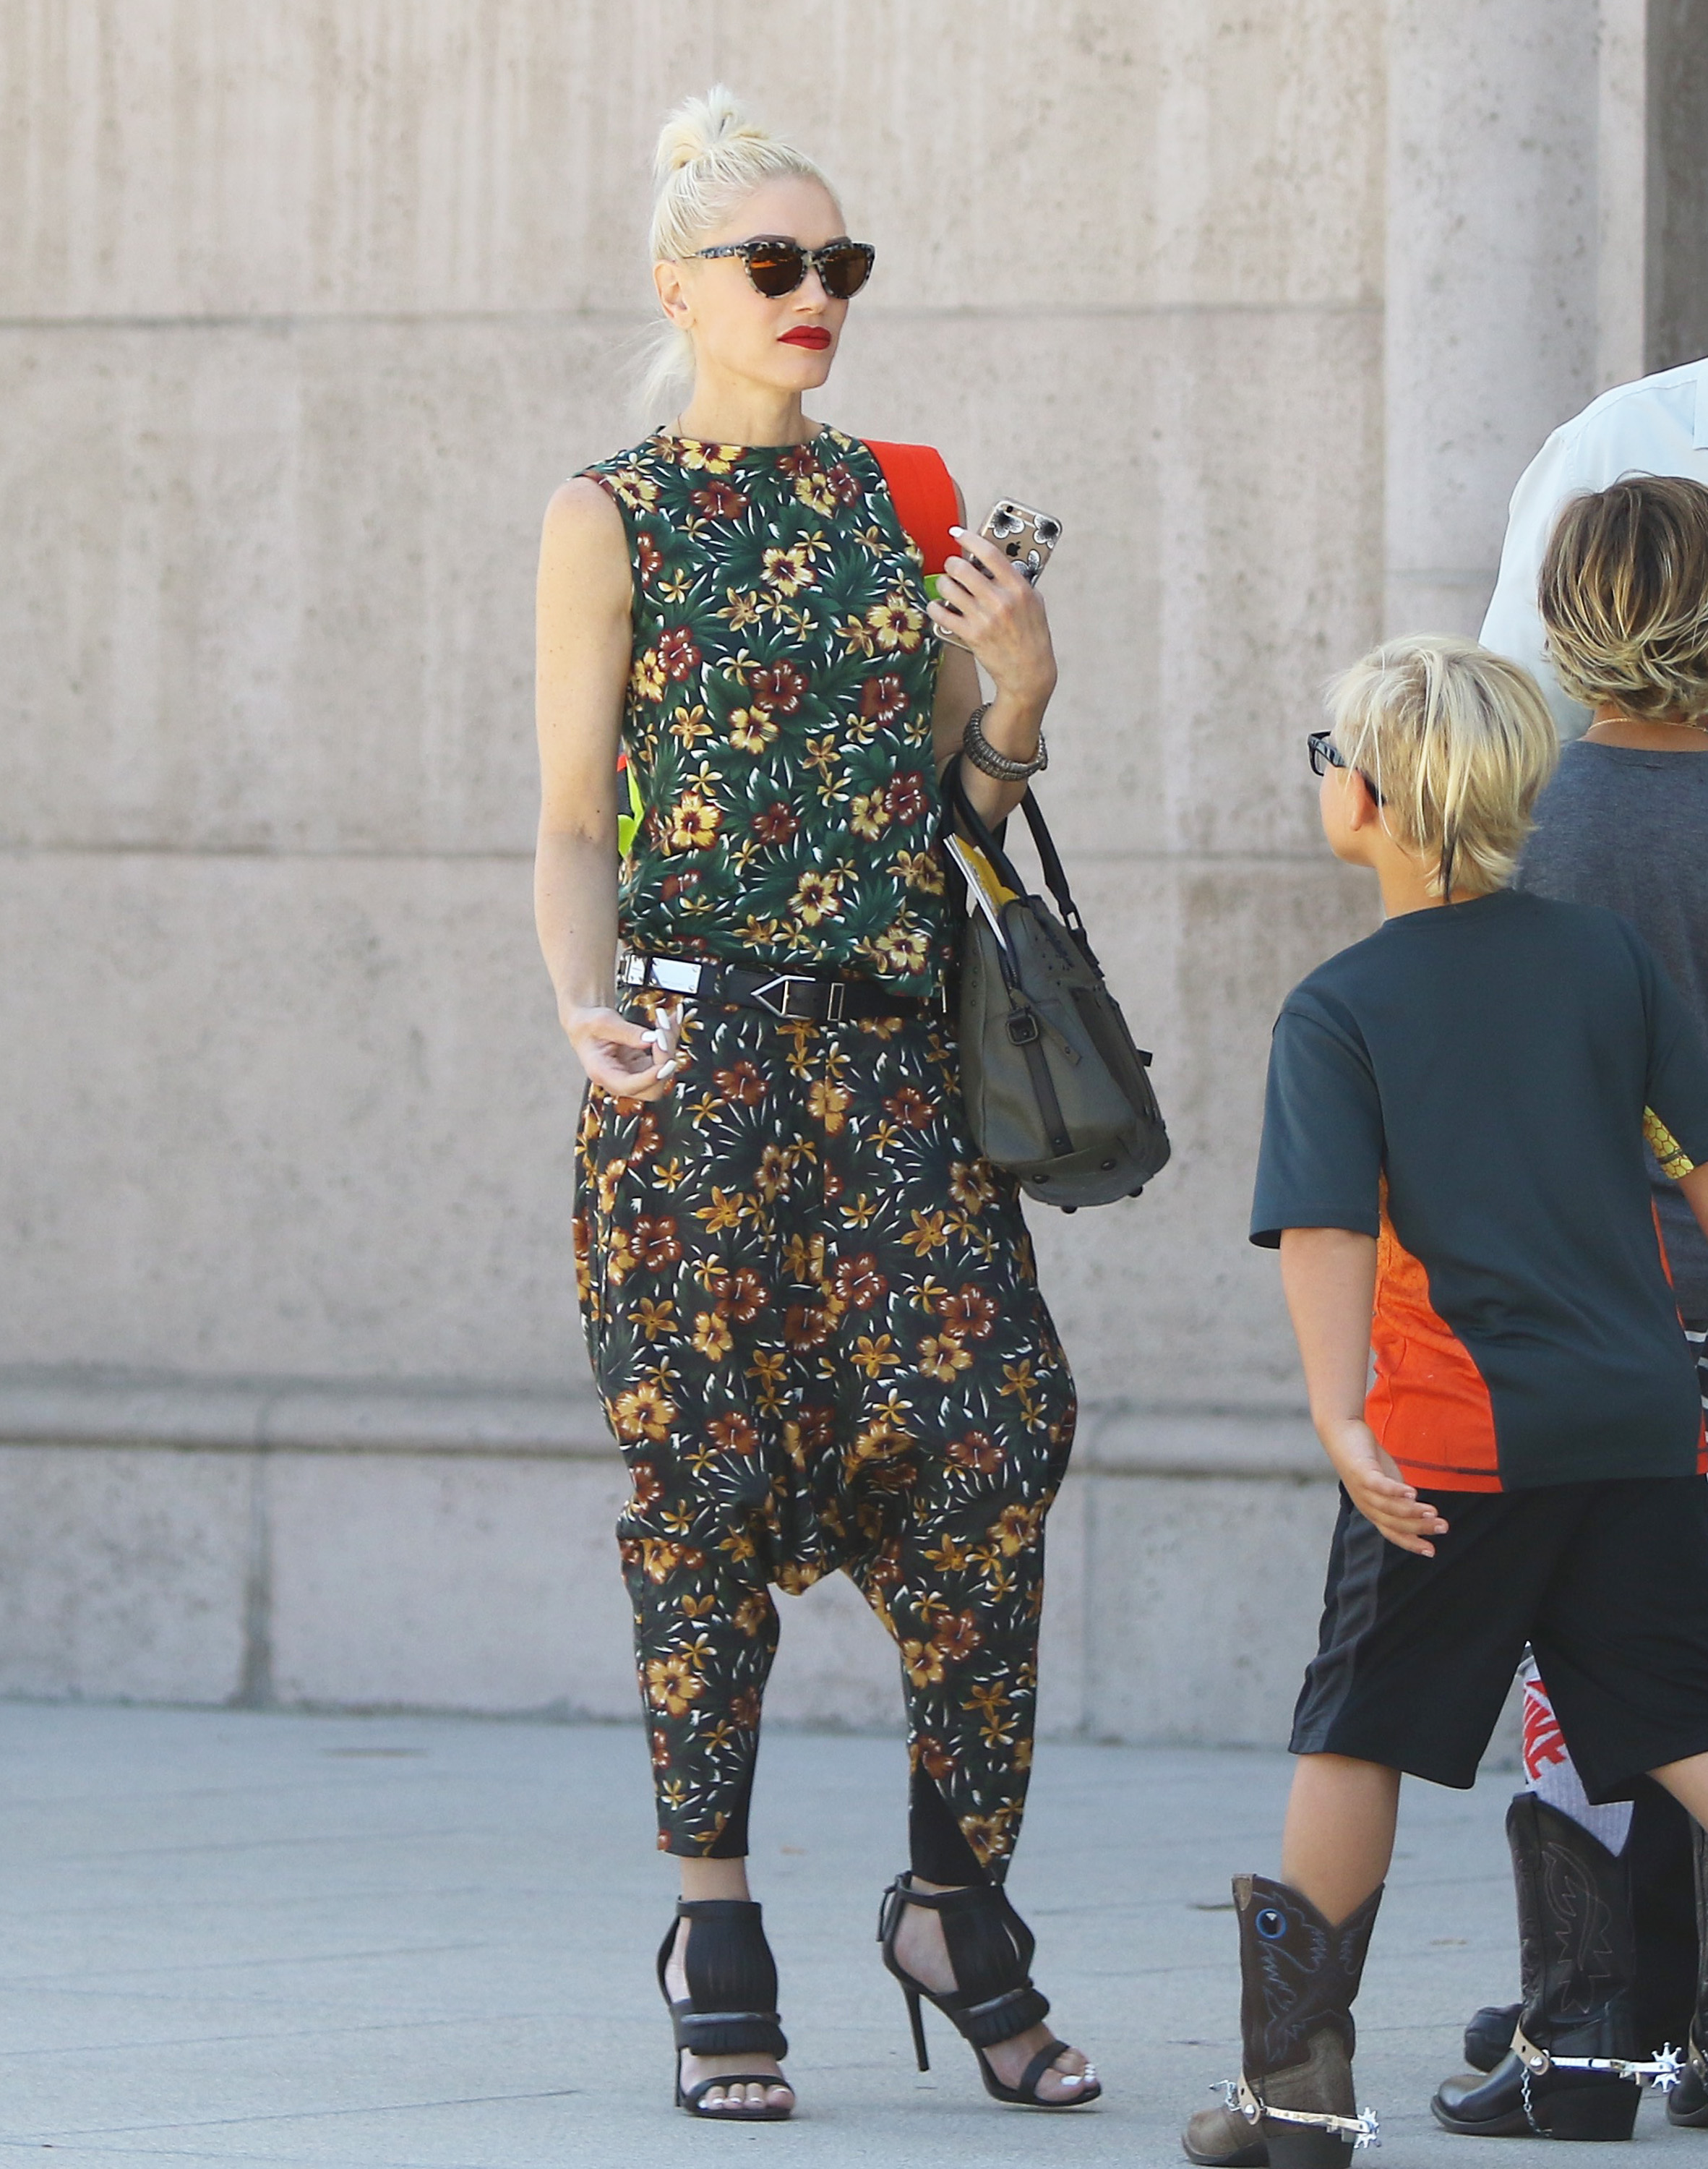 Gwen Stefani is Spotted Without Her Wedding Ring At Church